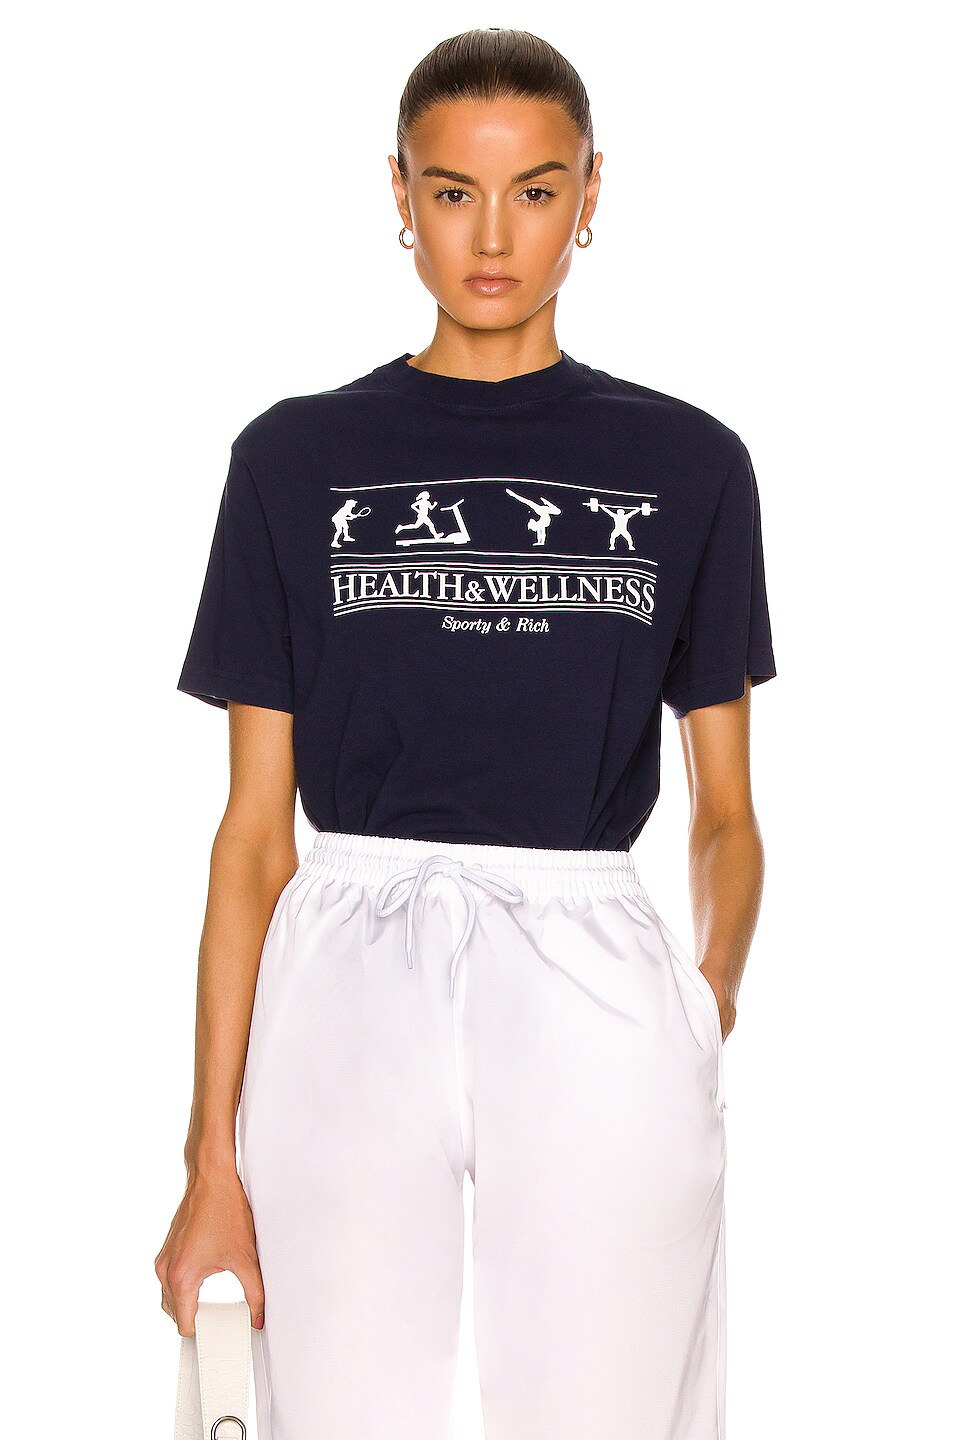 Image 1 of Sporty & Rich Health & Wellness Tee in Navy & White